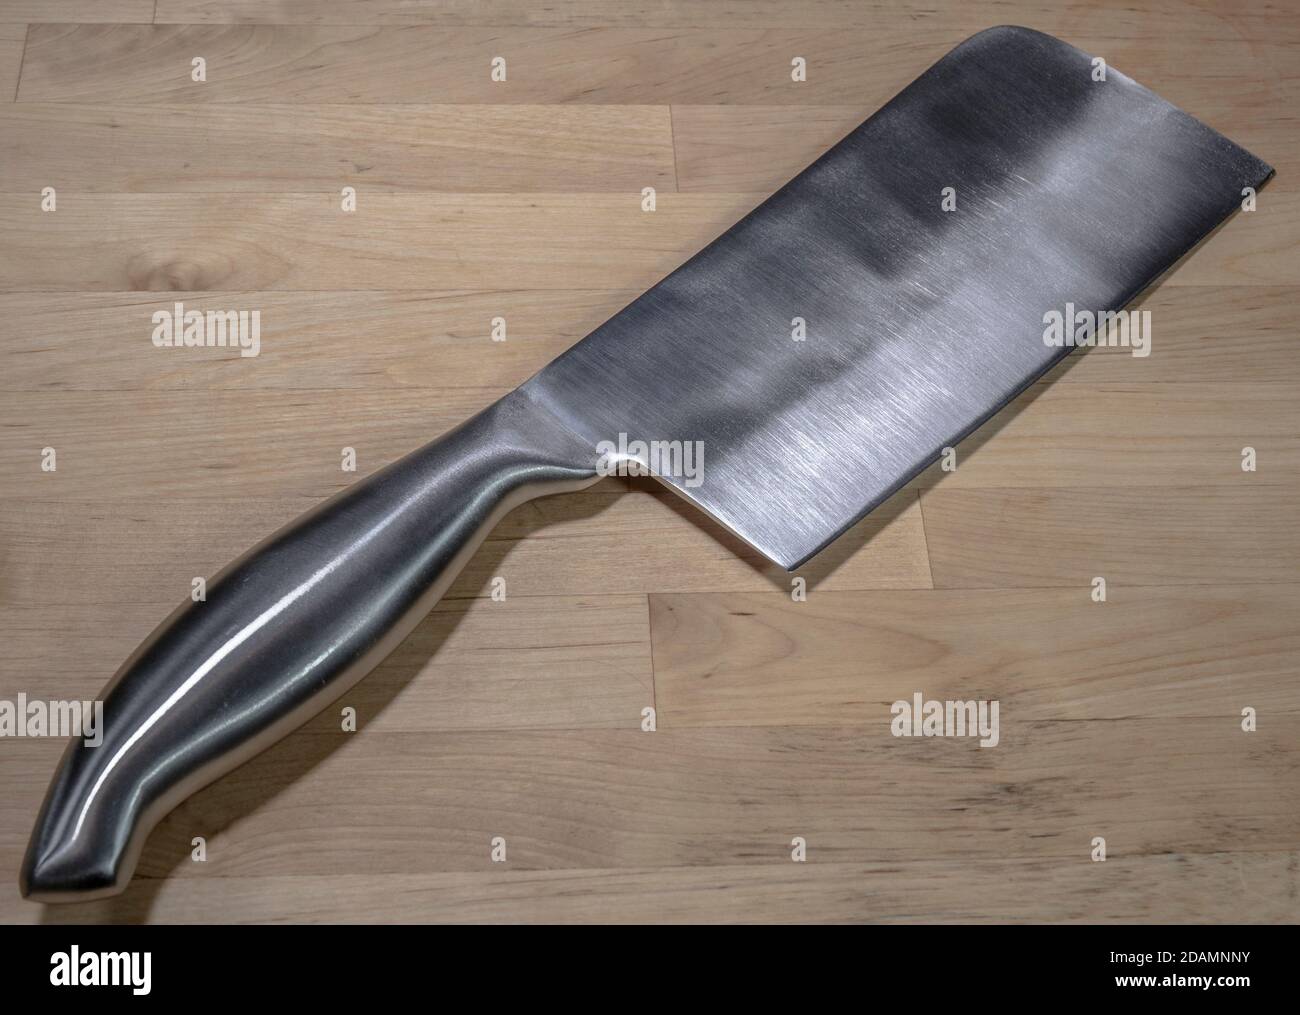 Closeup POV shot of a professional stainless steel cleaver lying on one side on a wooden table. Stock Photo